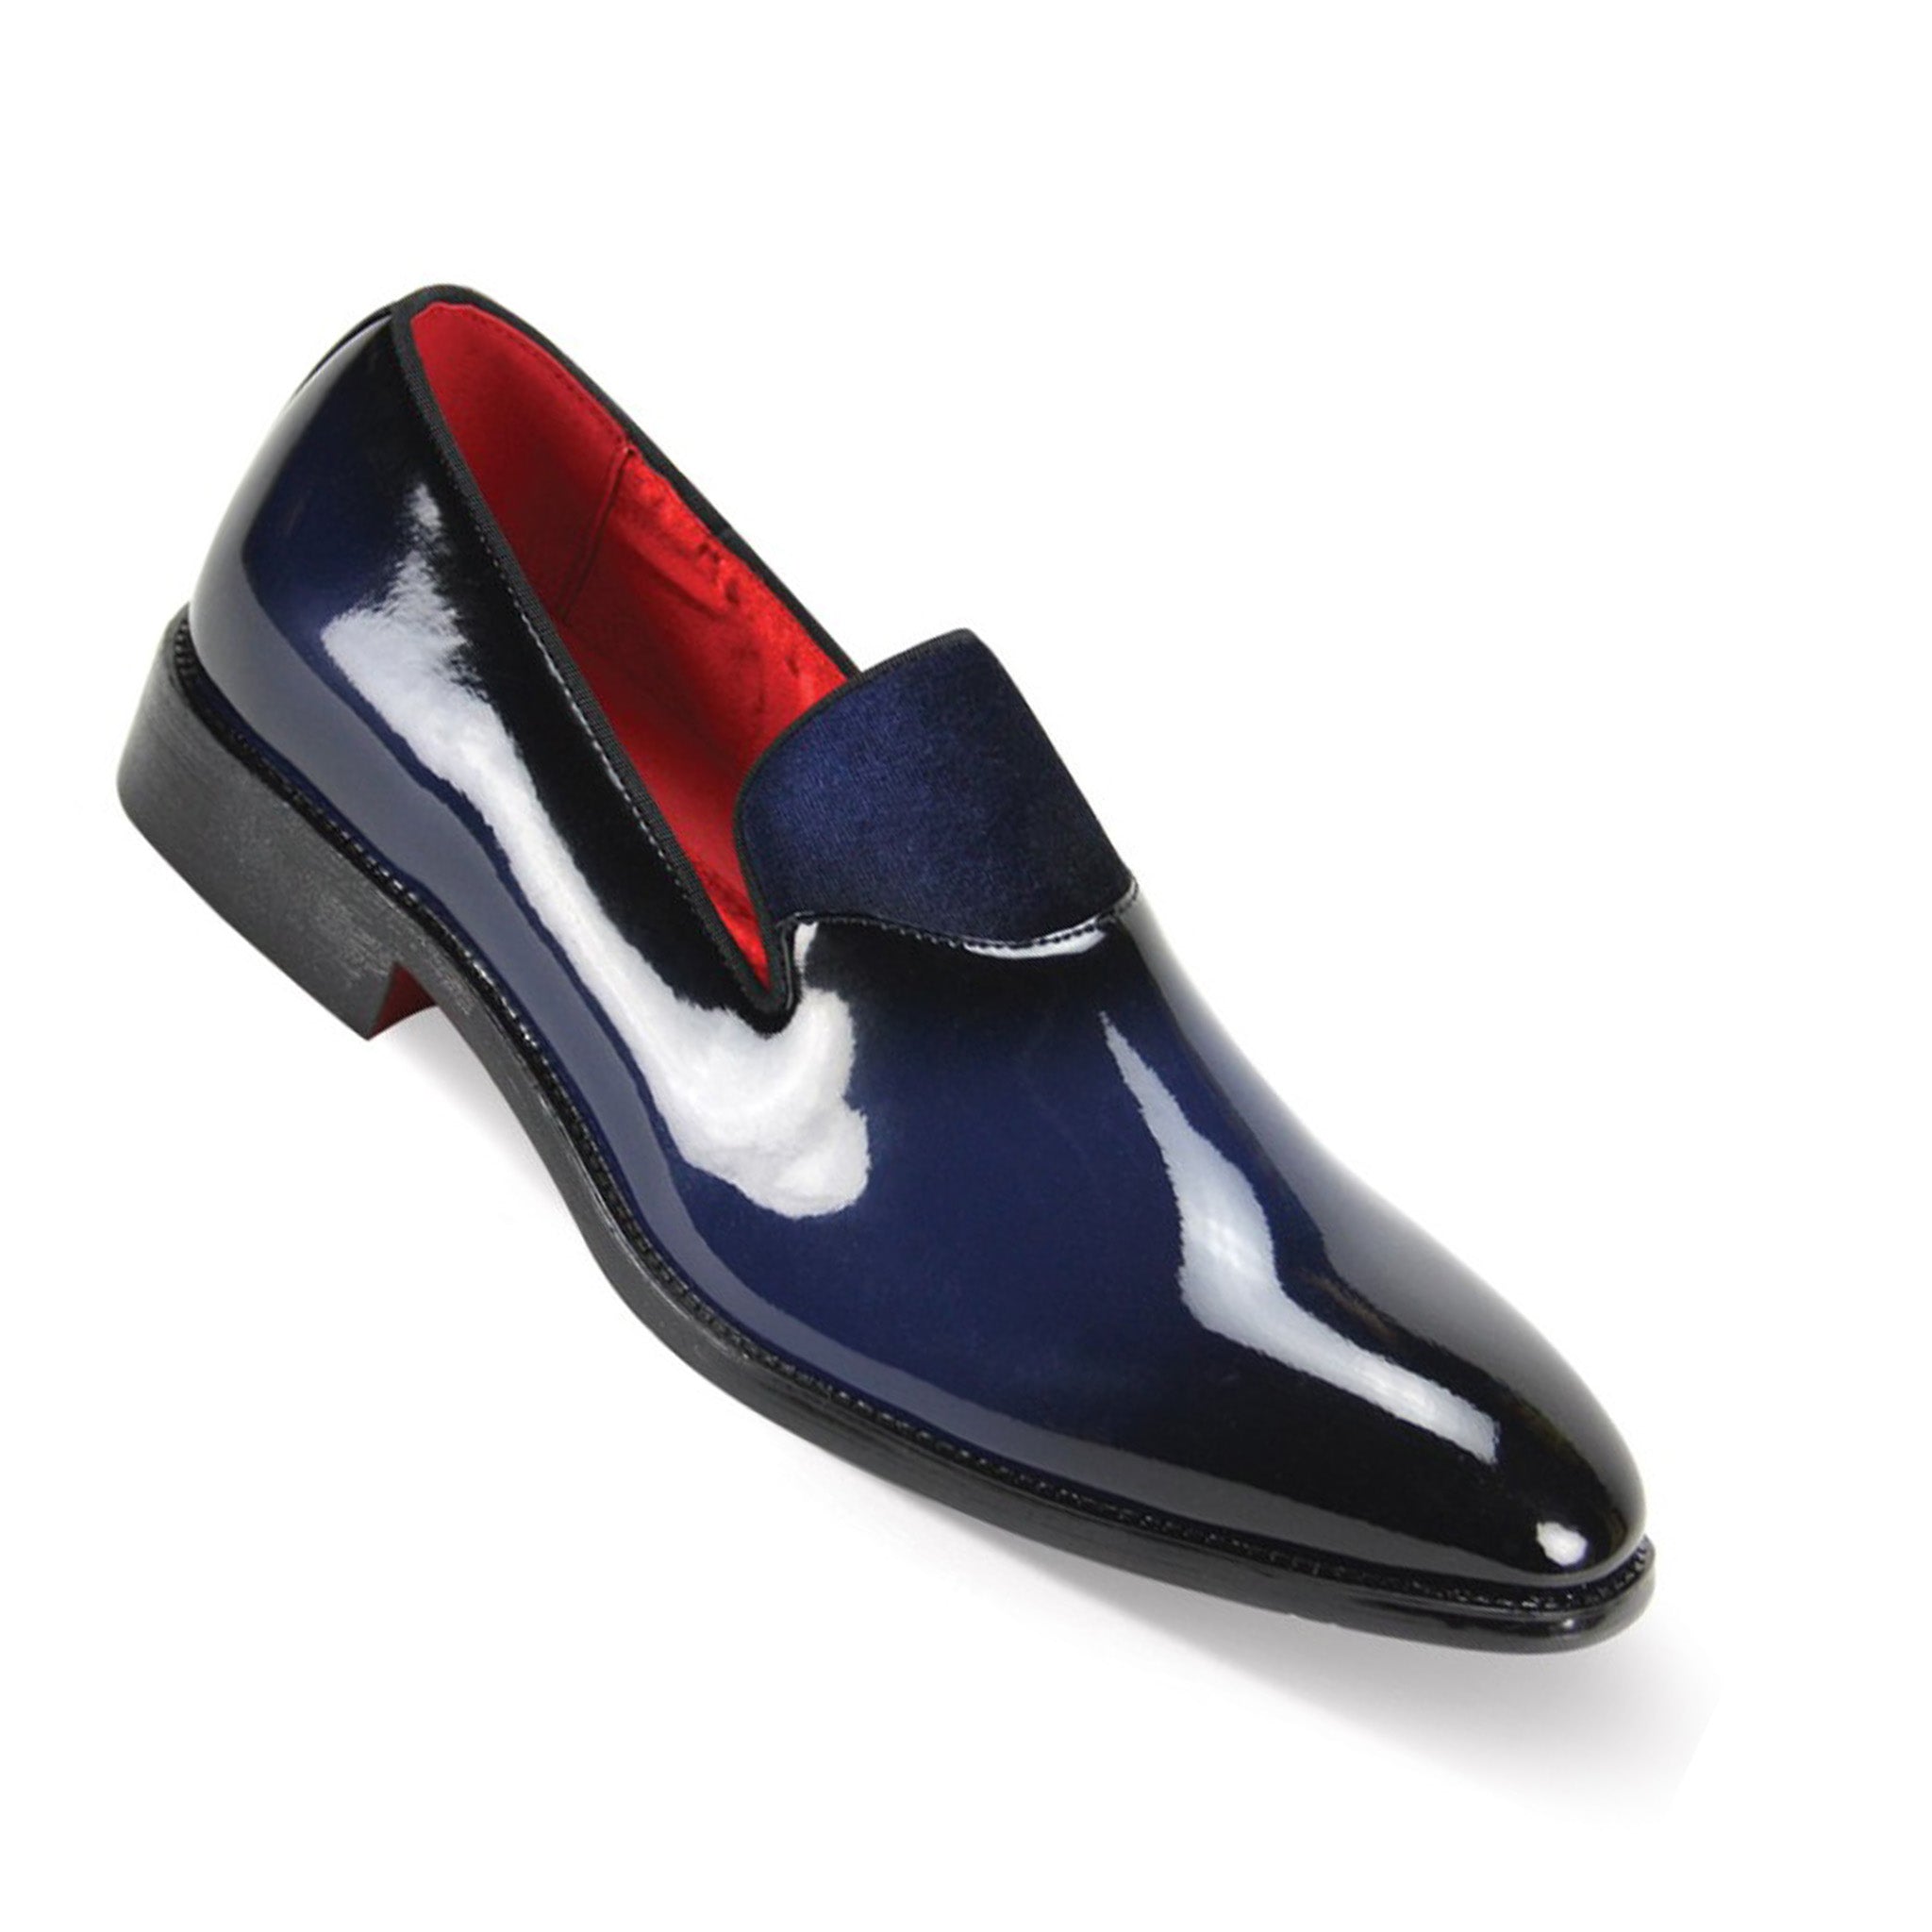 Navy Patent Fashion Loafer